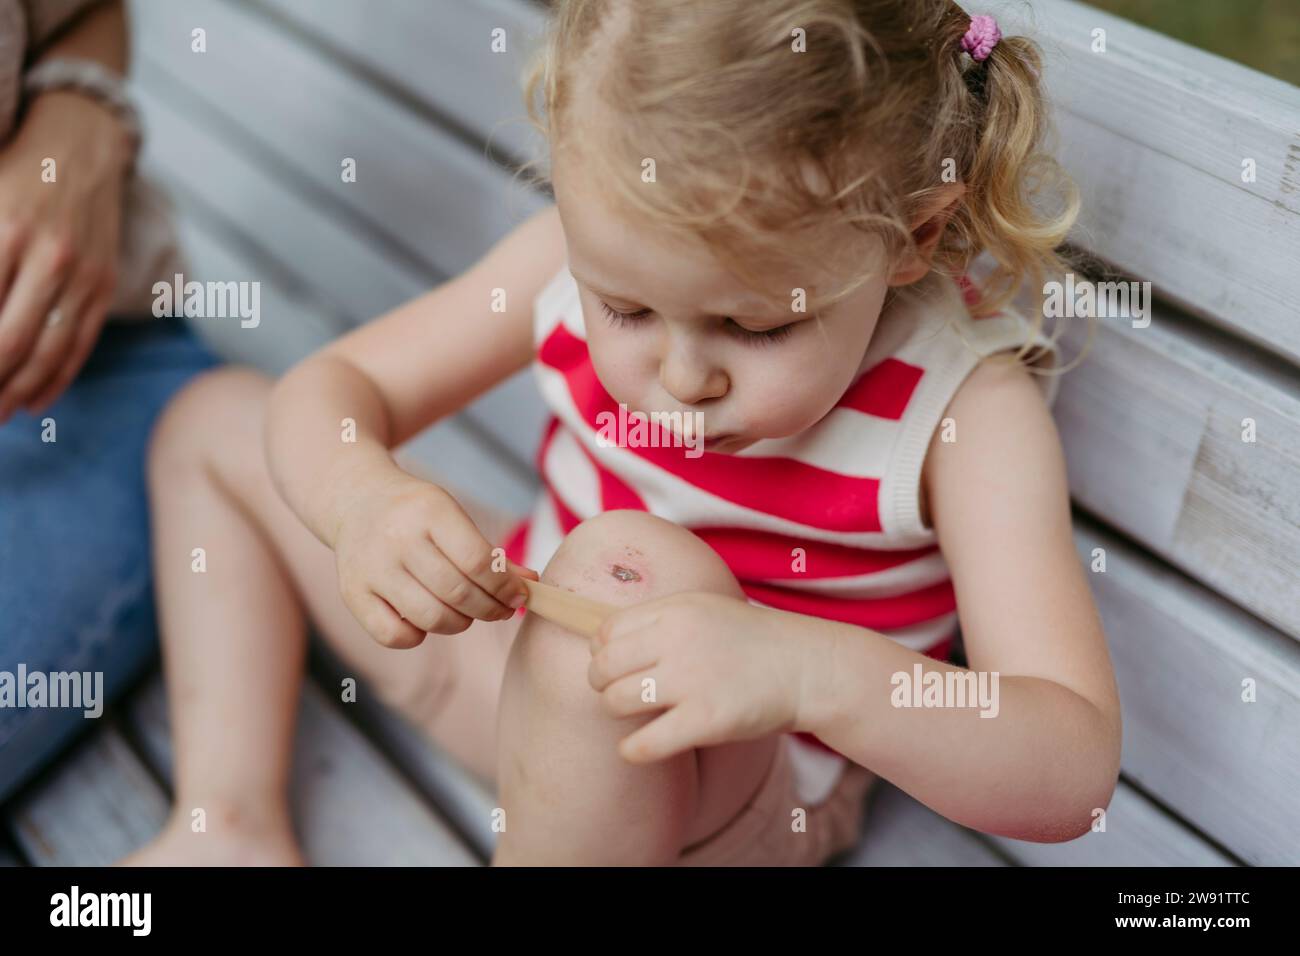 Little girl blowing on injured knee and putting on band aid Stock Photo